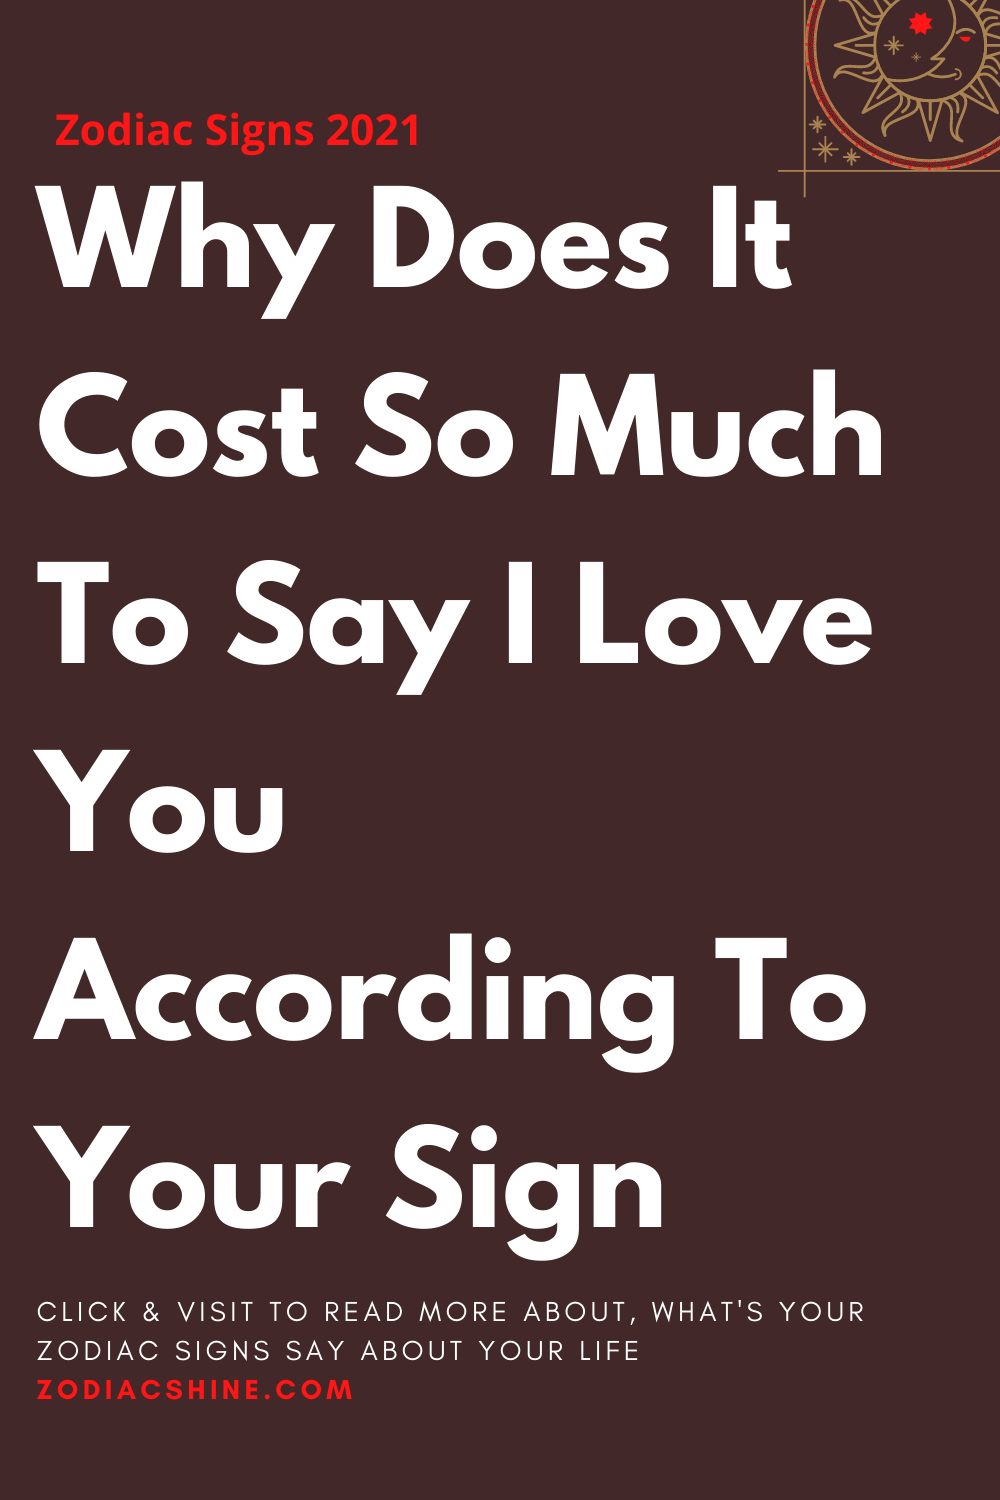 Why Does It Cost So Much To Say I Love You According To Your Sign